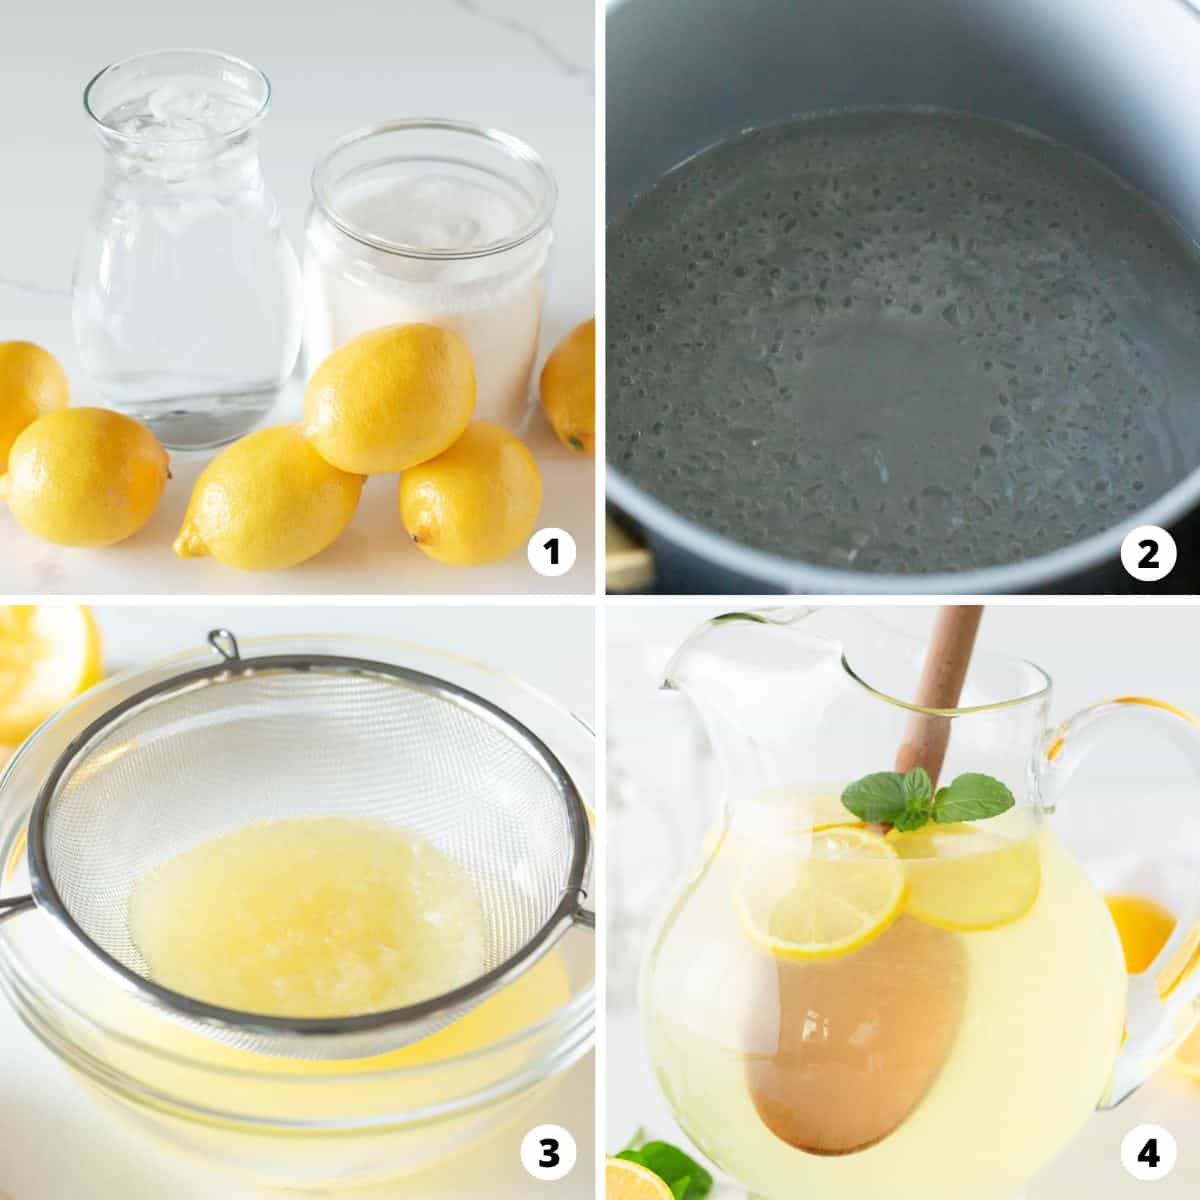 Showing how to make lemonade in a 4 step collage.